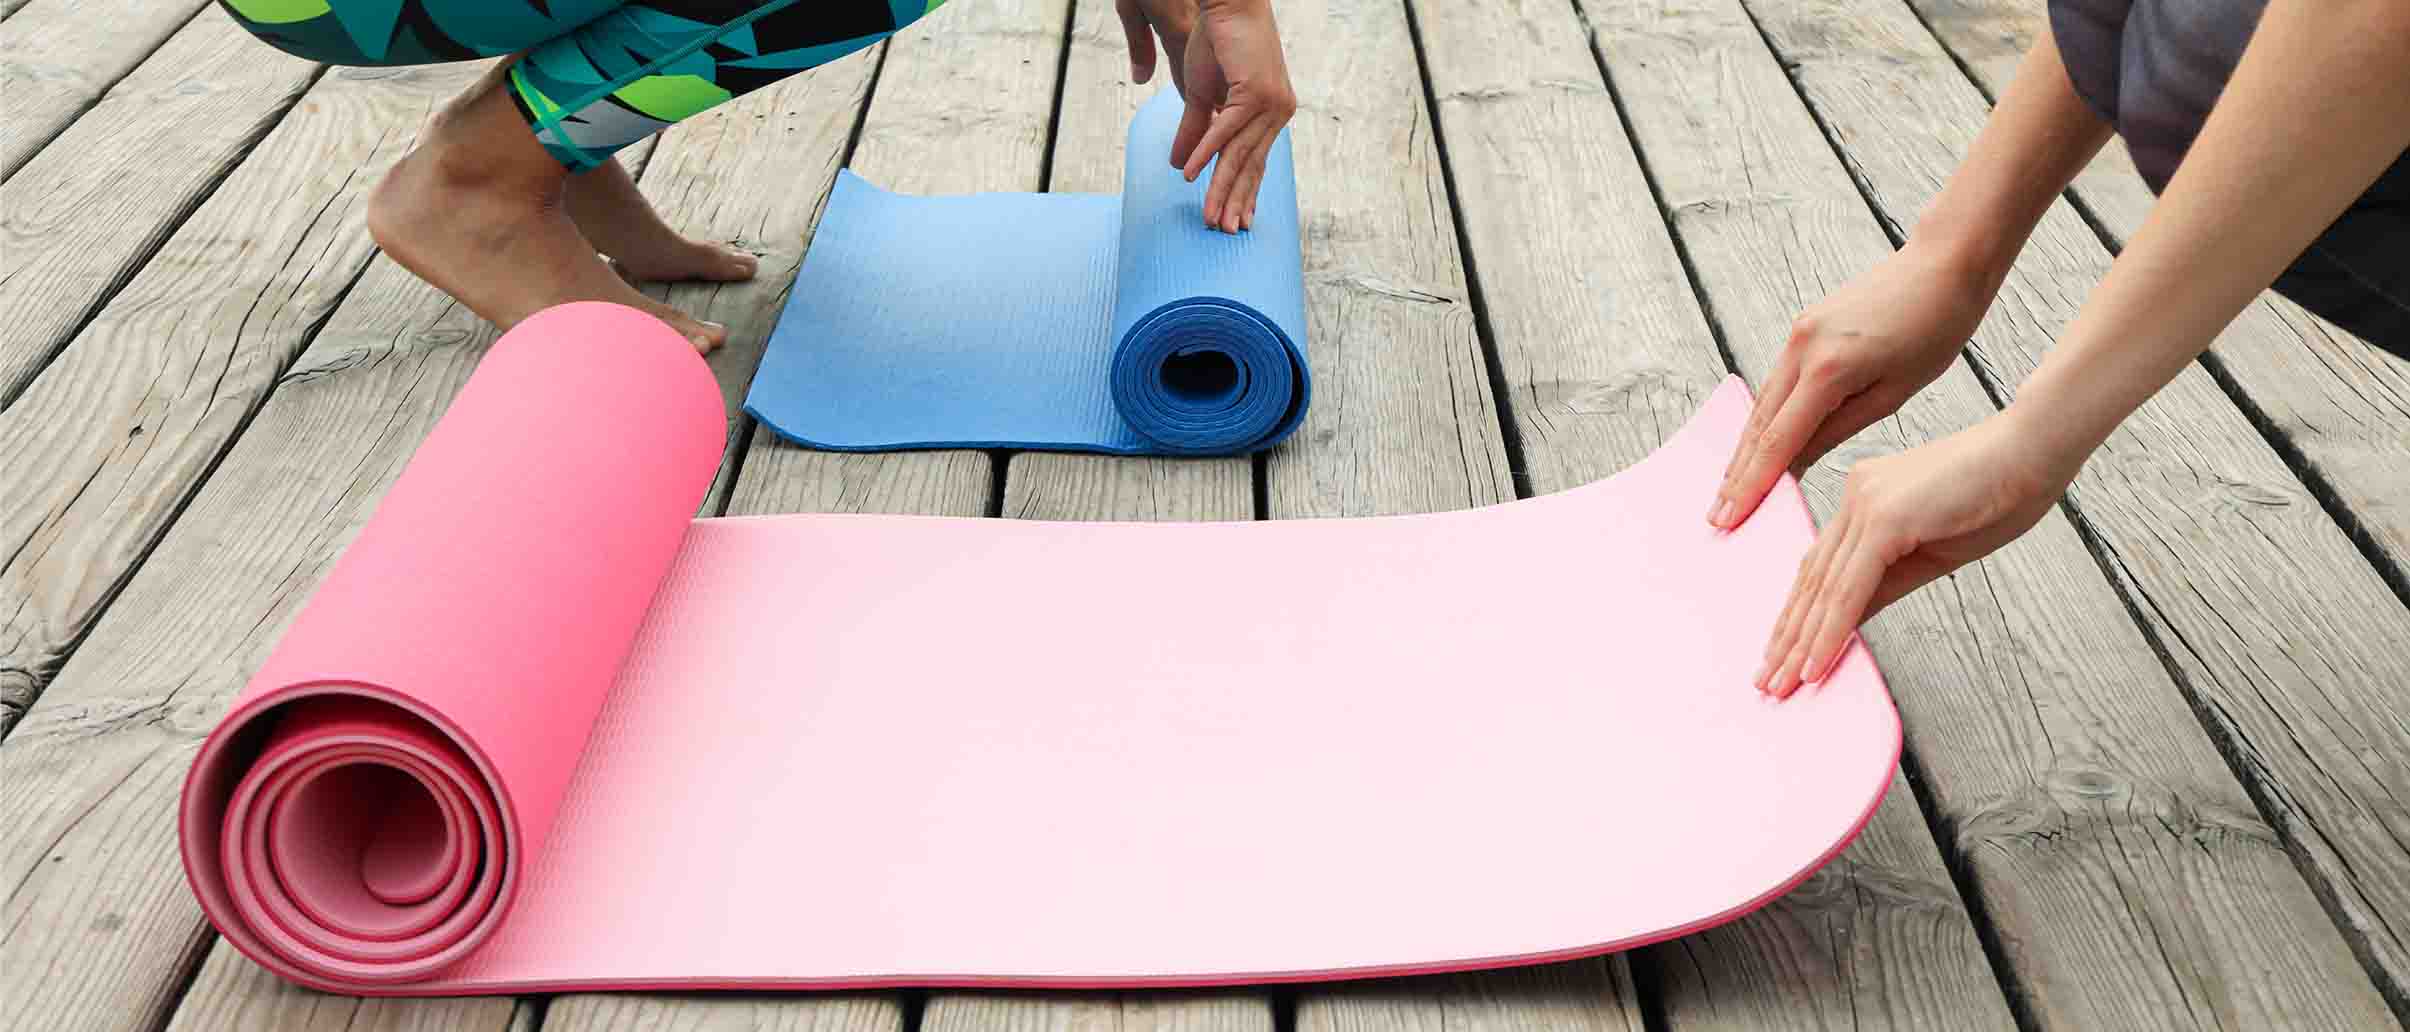 Image of people rolling out yoga mats